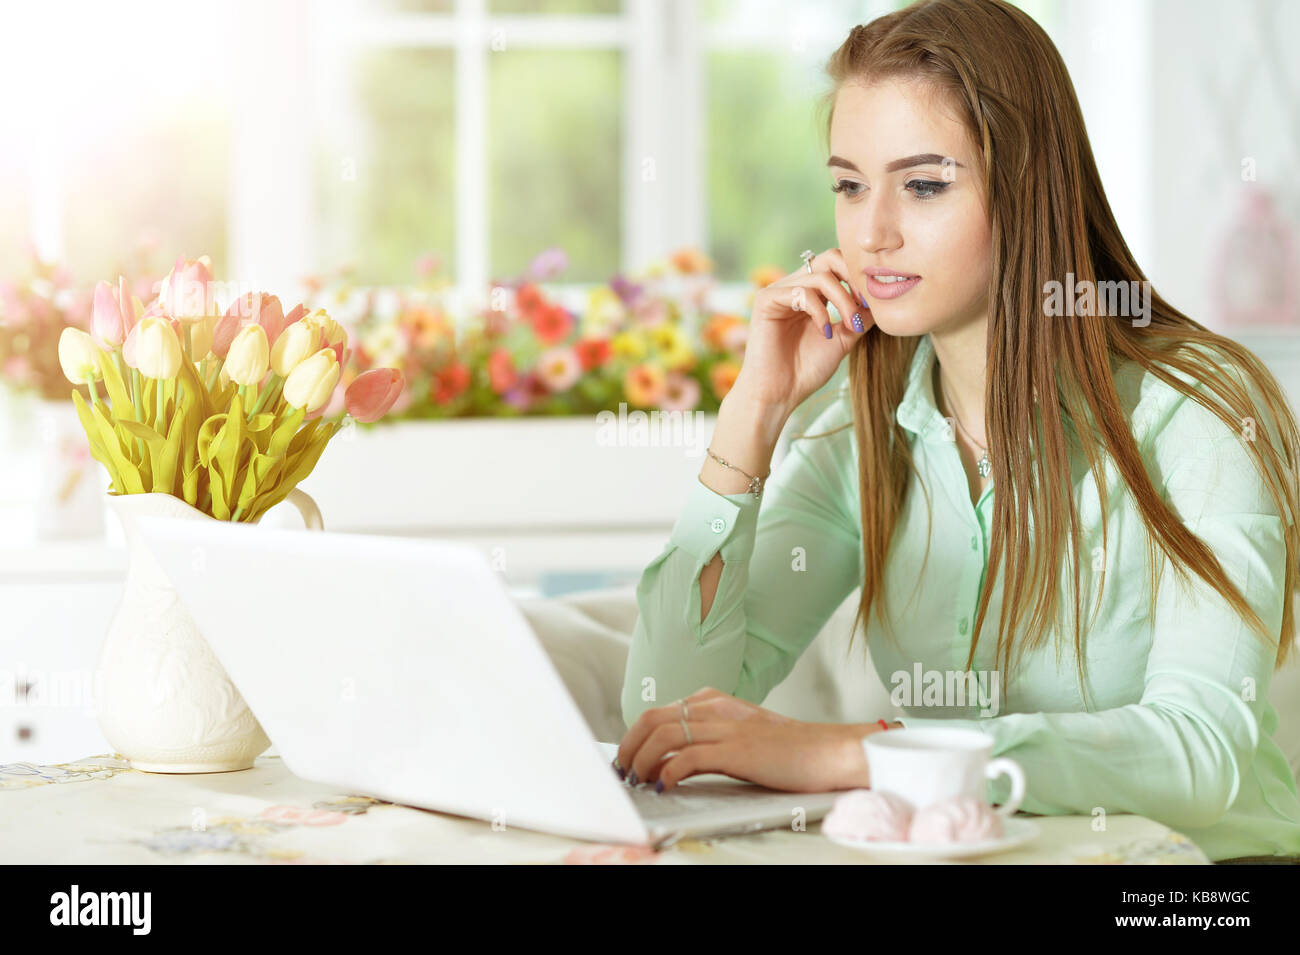 young woman looking at laptop Stock Photo